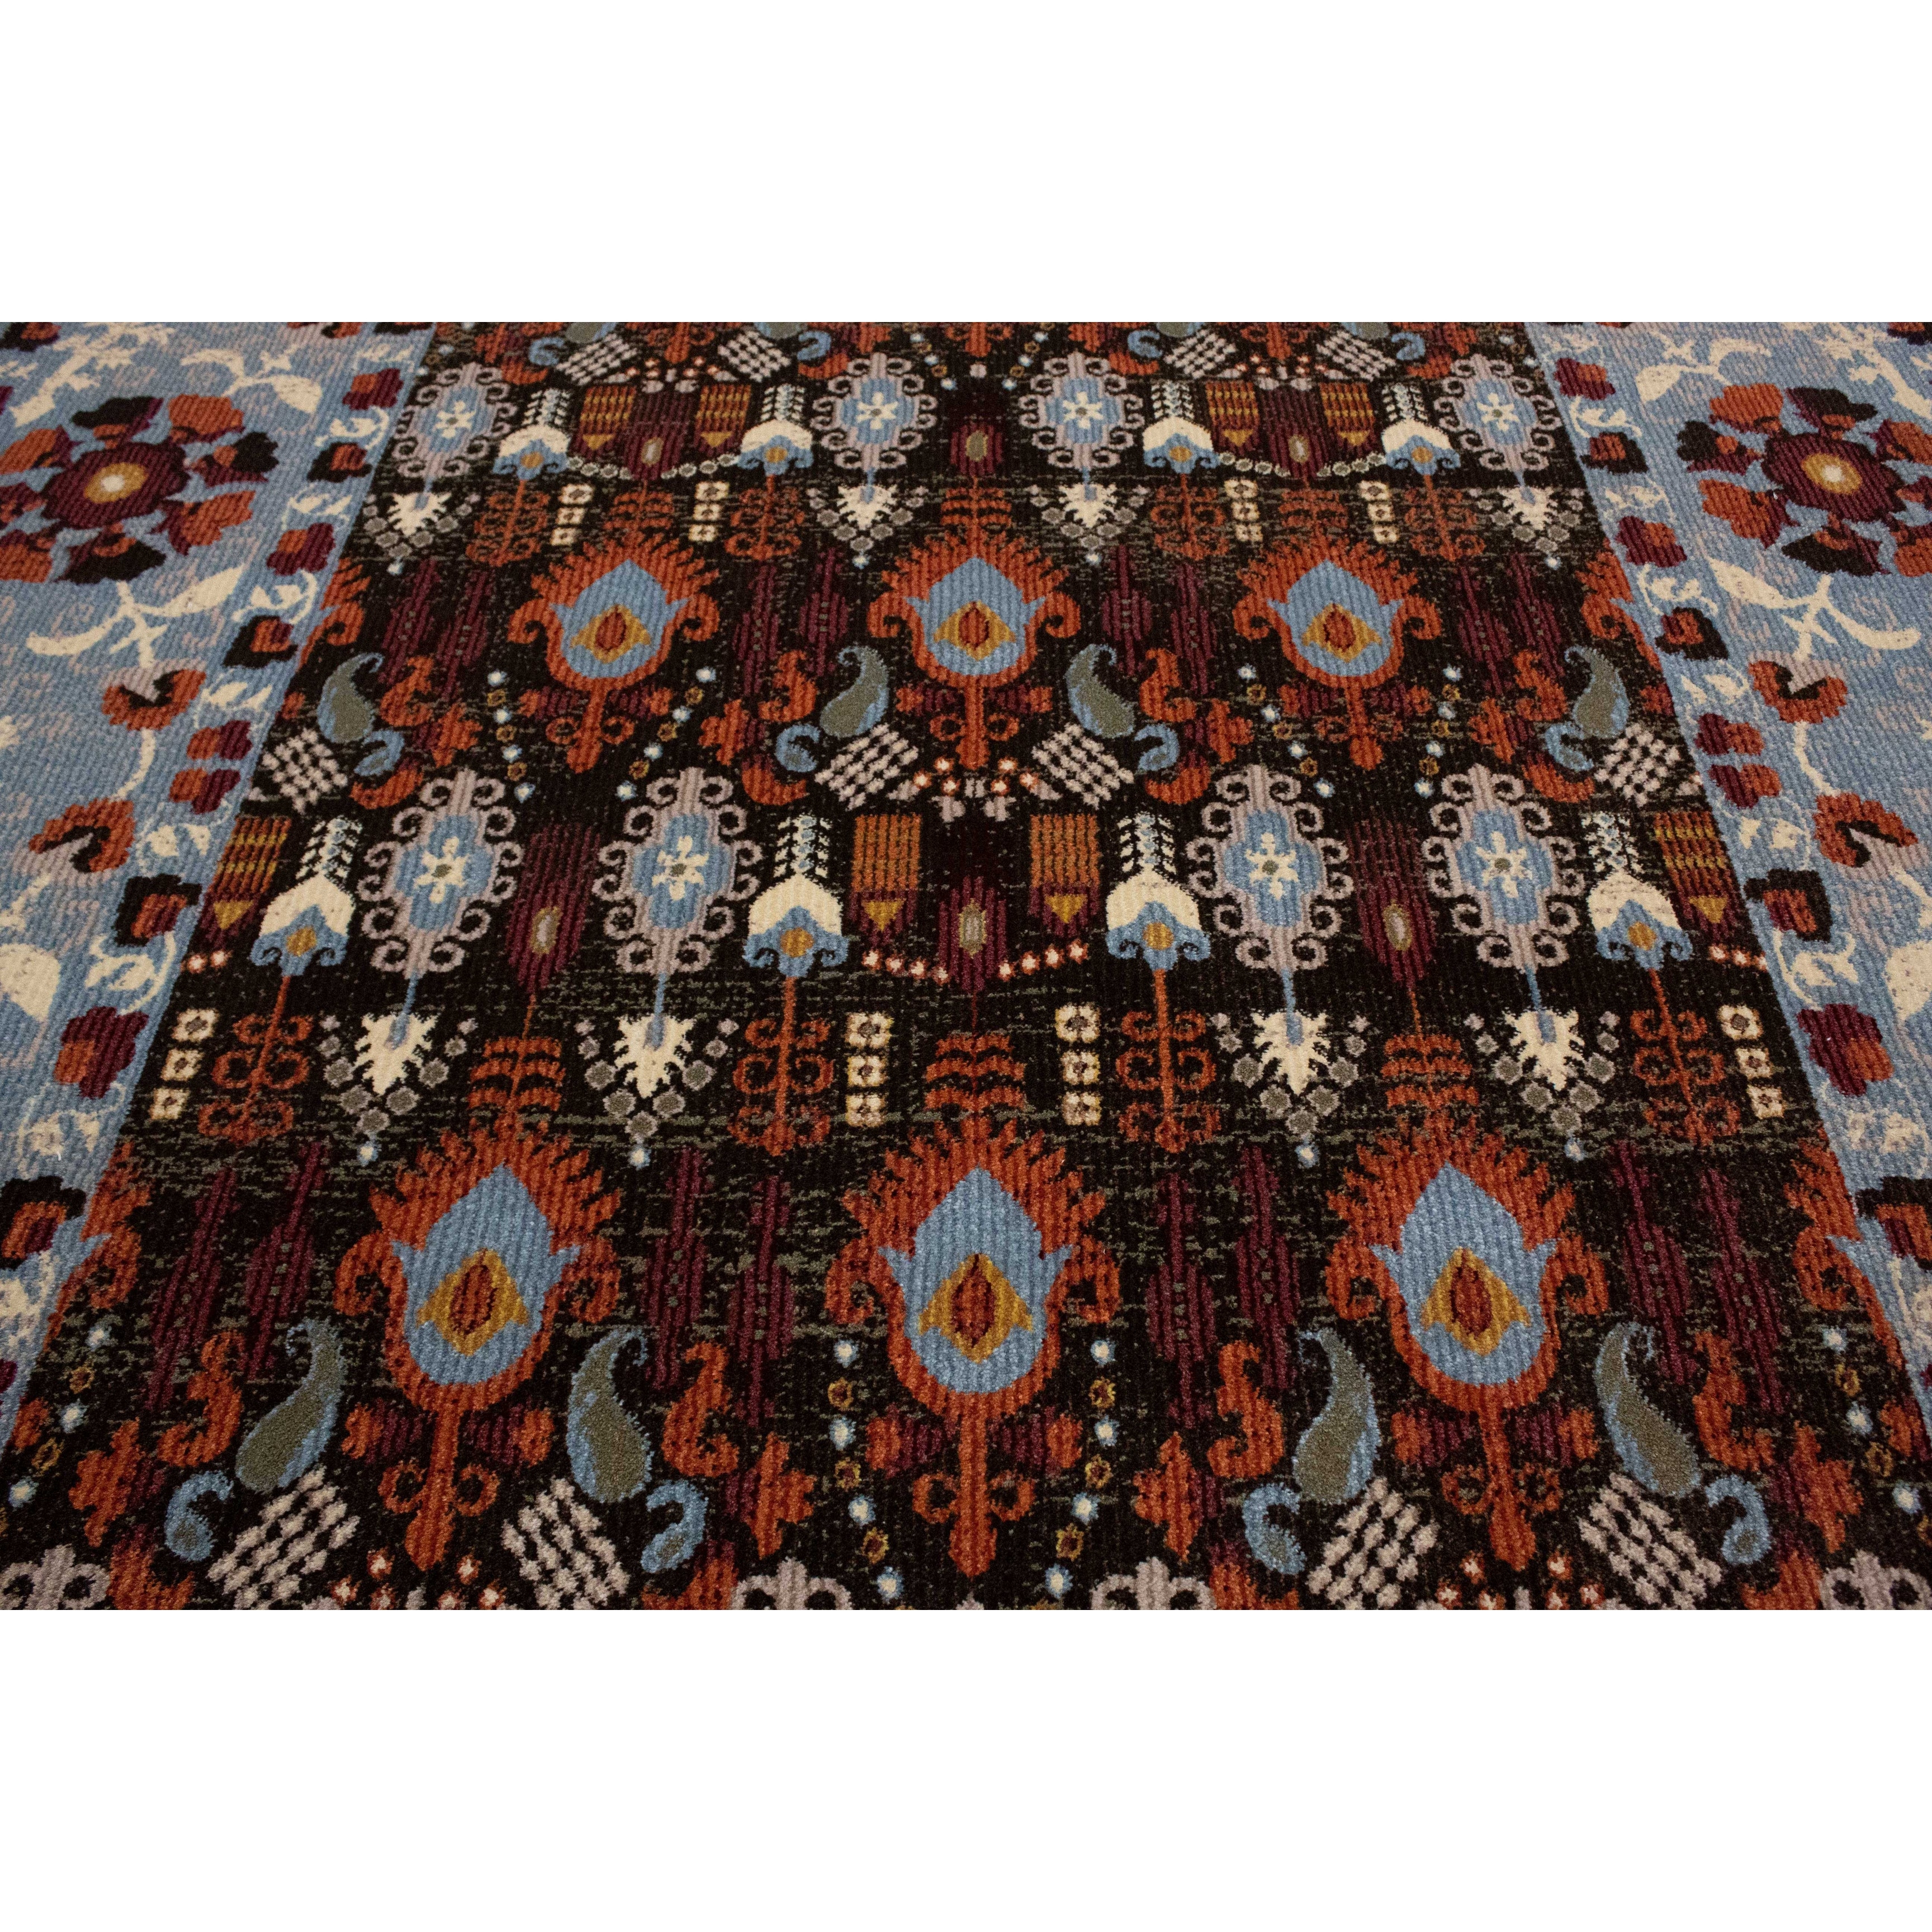 https://ak1.ostkcdn.com/images/products/is/images/direct/3a4331aa1d1a99b42dd761717ee827f6a77e9820/Noori-Rug-Karabag-Socorro-Rug.jpg